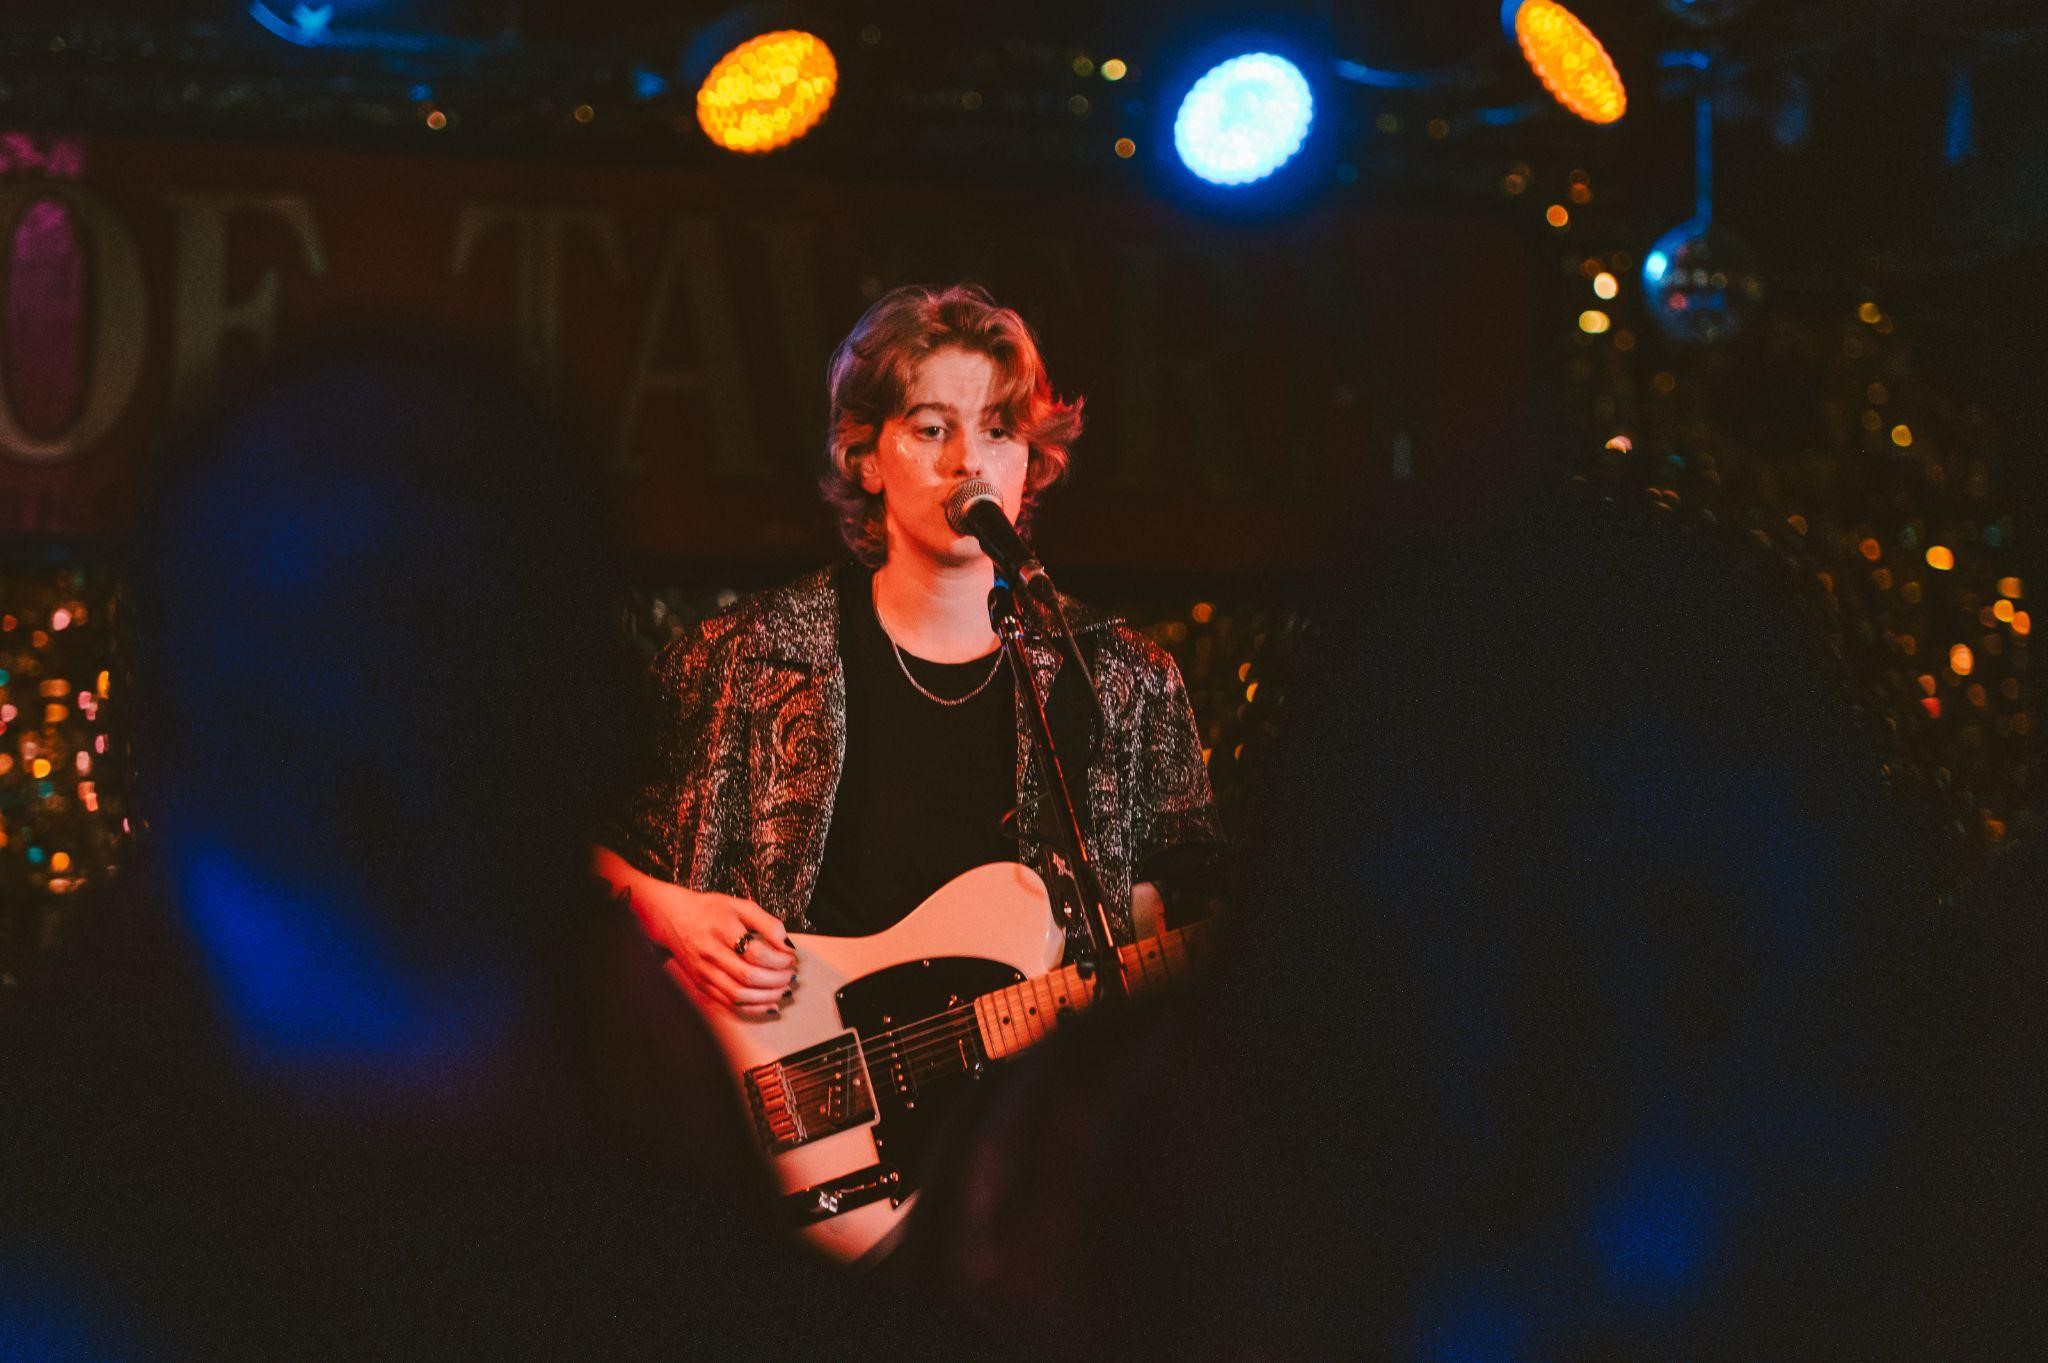 On-stage, Emma Beckett plays guitar for the majority of their set. However, they were brought up with classical piano training, and only began writing their own songs when home alone-, after stealing their brother’s ukulele. Taken By Janine Van Oostrom / @janine.v.photography